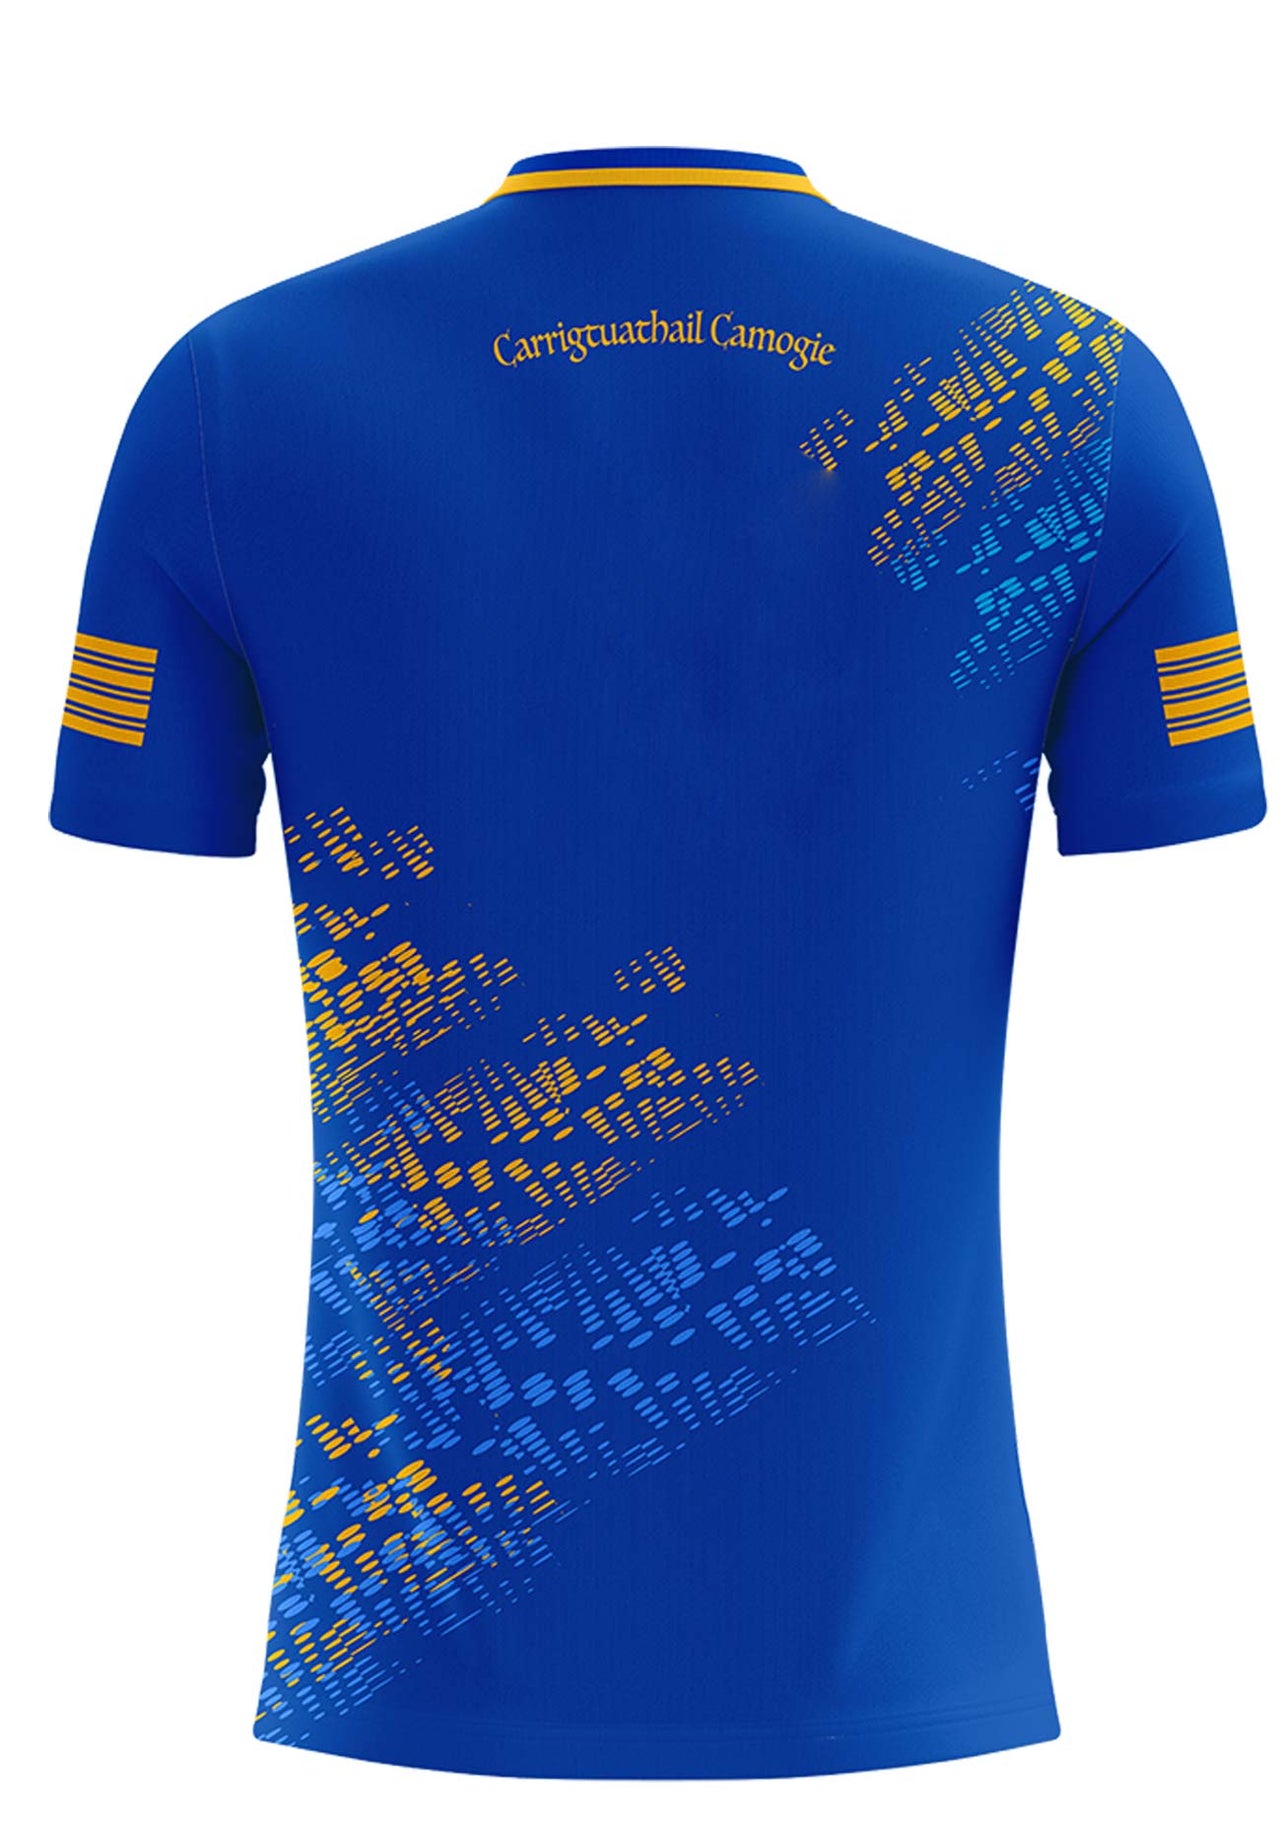 Carrigtwohill Camogie Home Jersey Regular Fit Adult